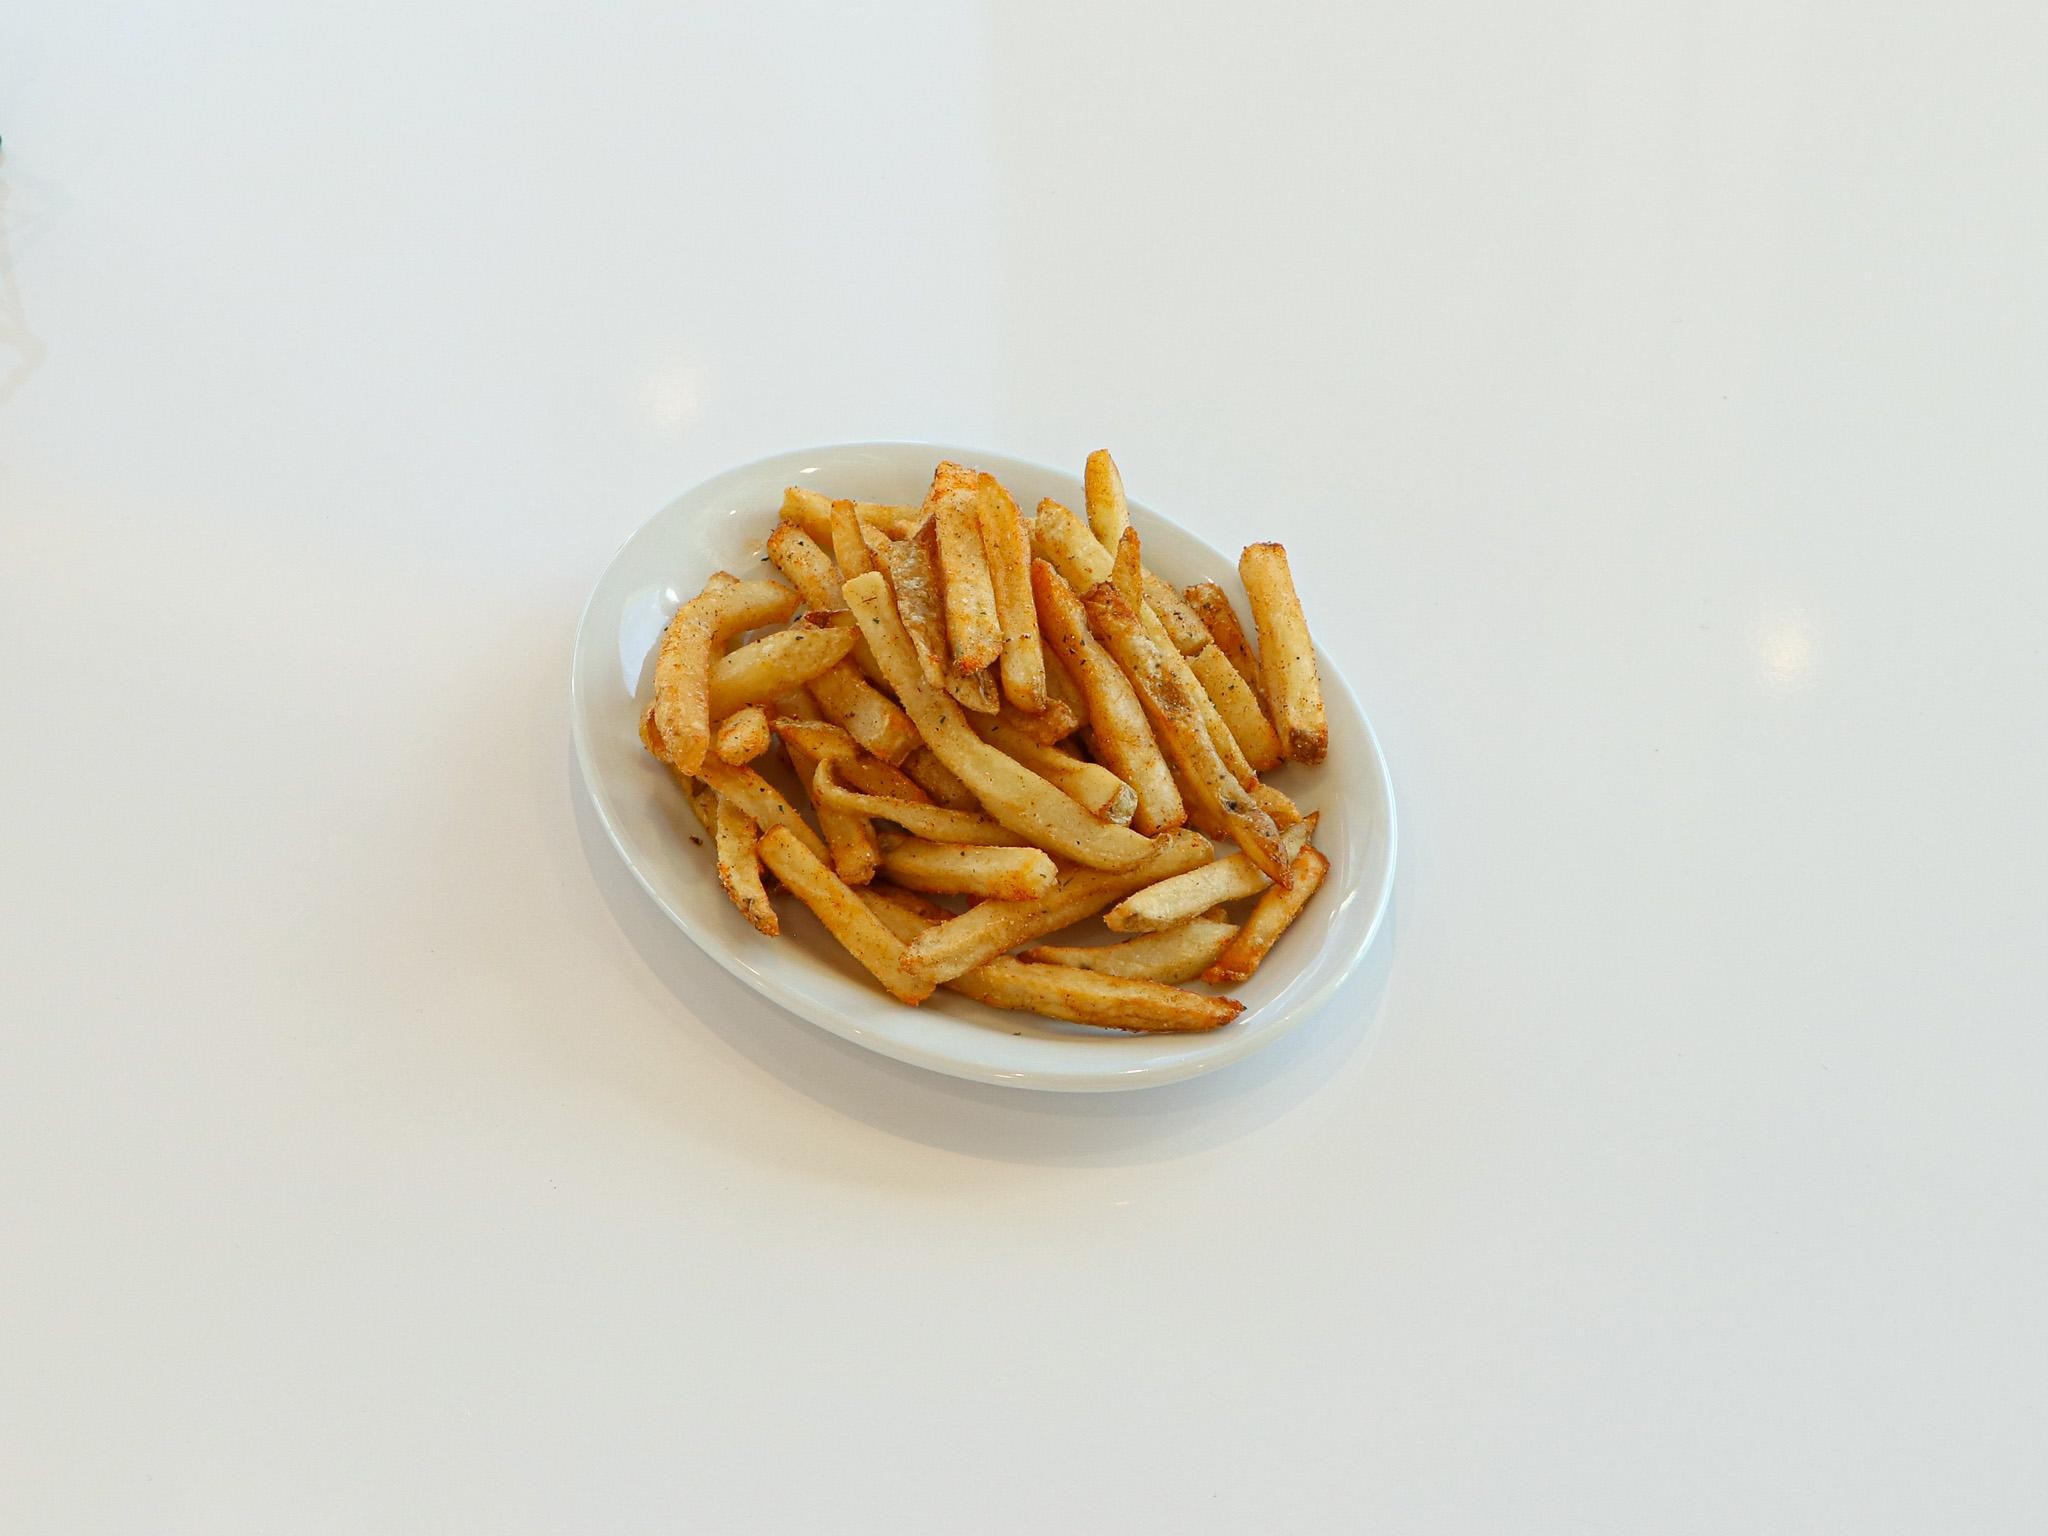 House Fries: